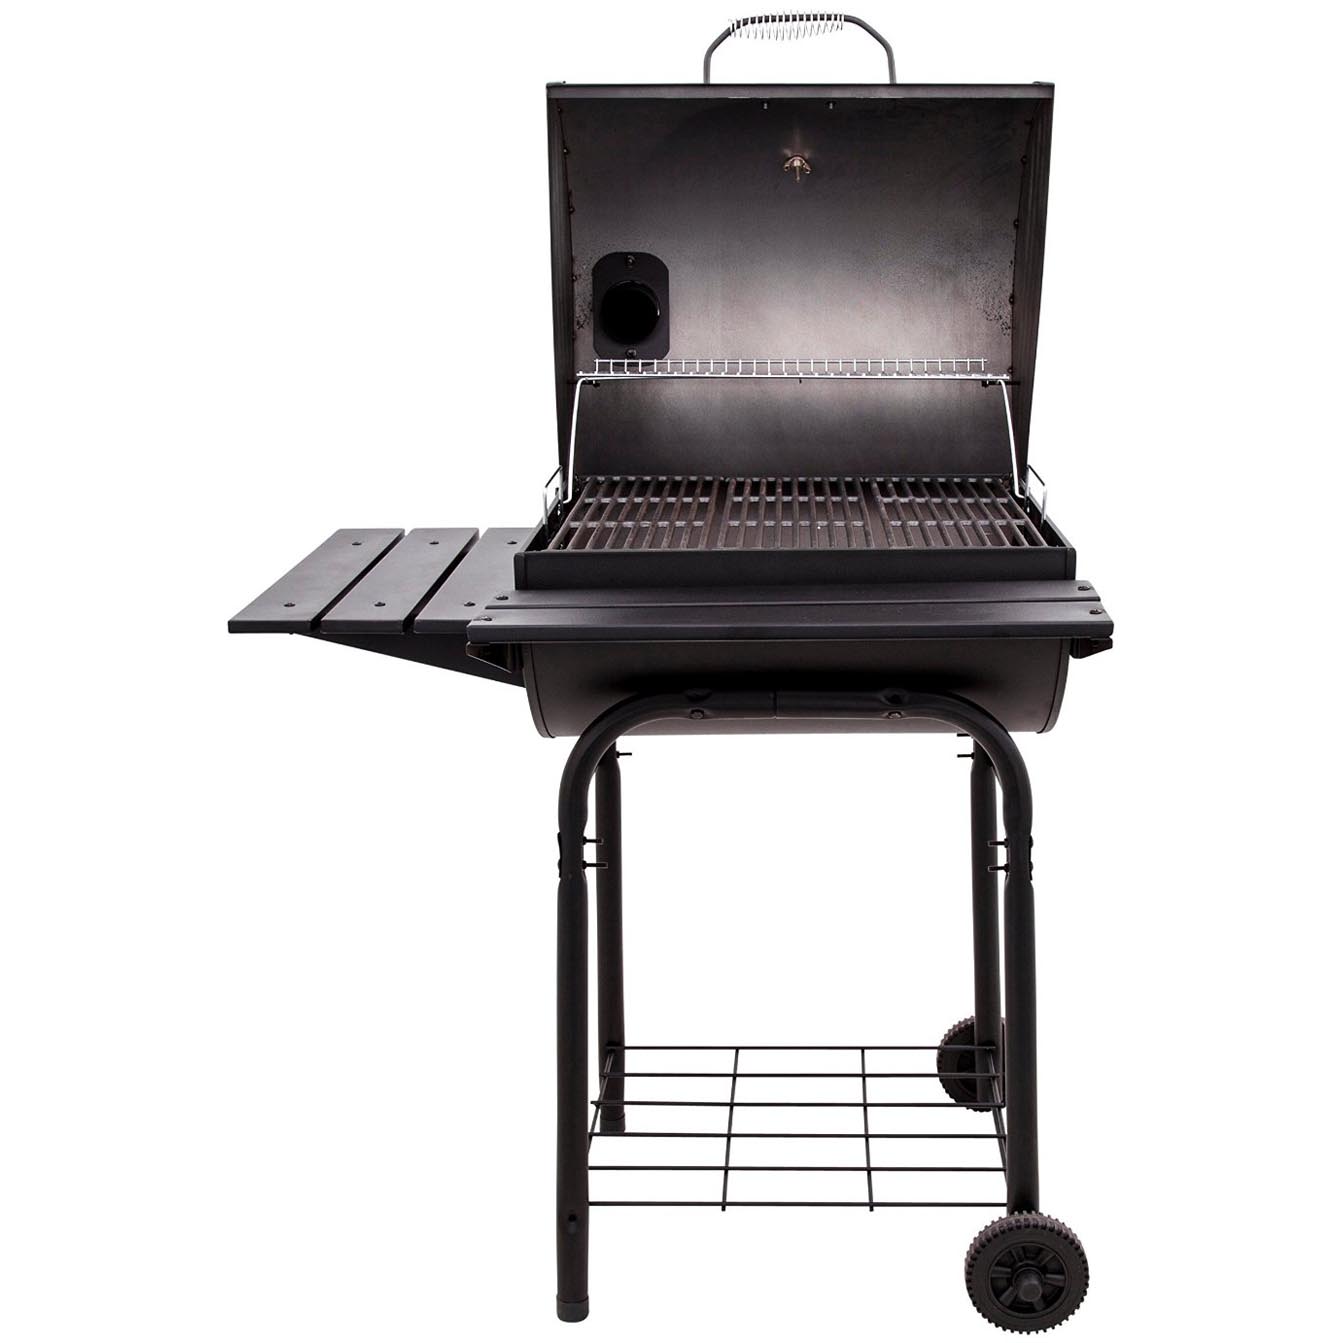 American Gourmet by Char-Broil 625 sq in Charcoal Barrel Outdoor Grill - image 3 of 6